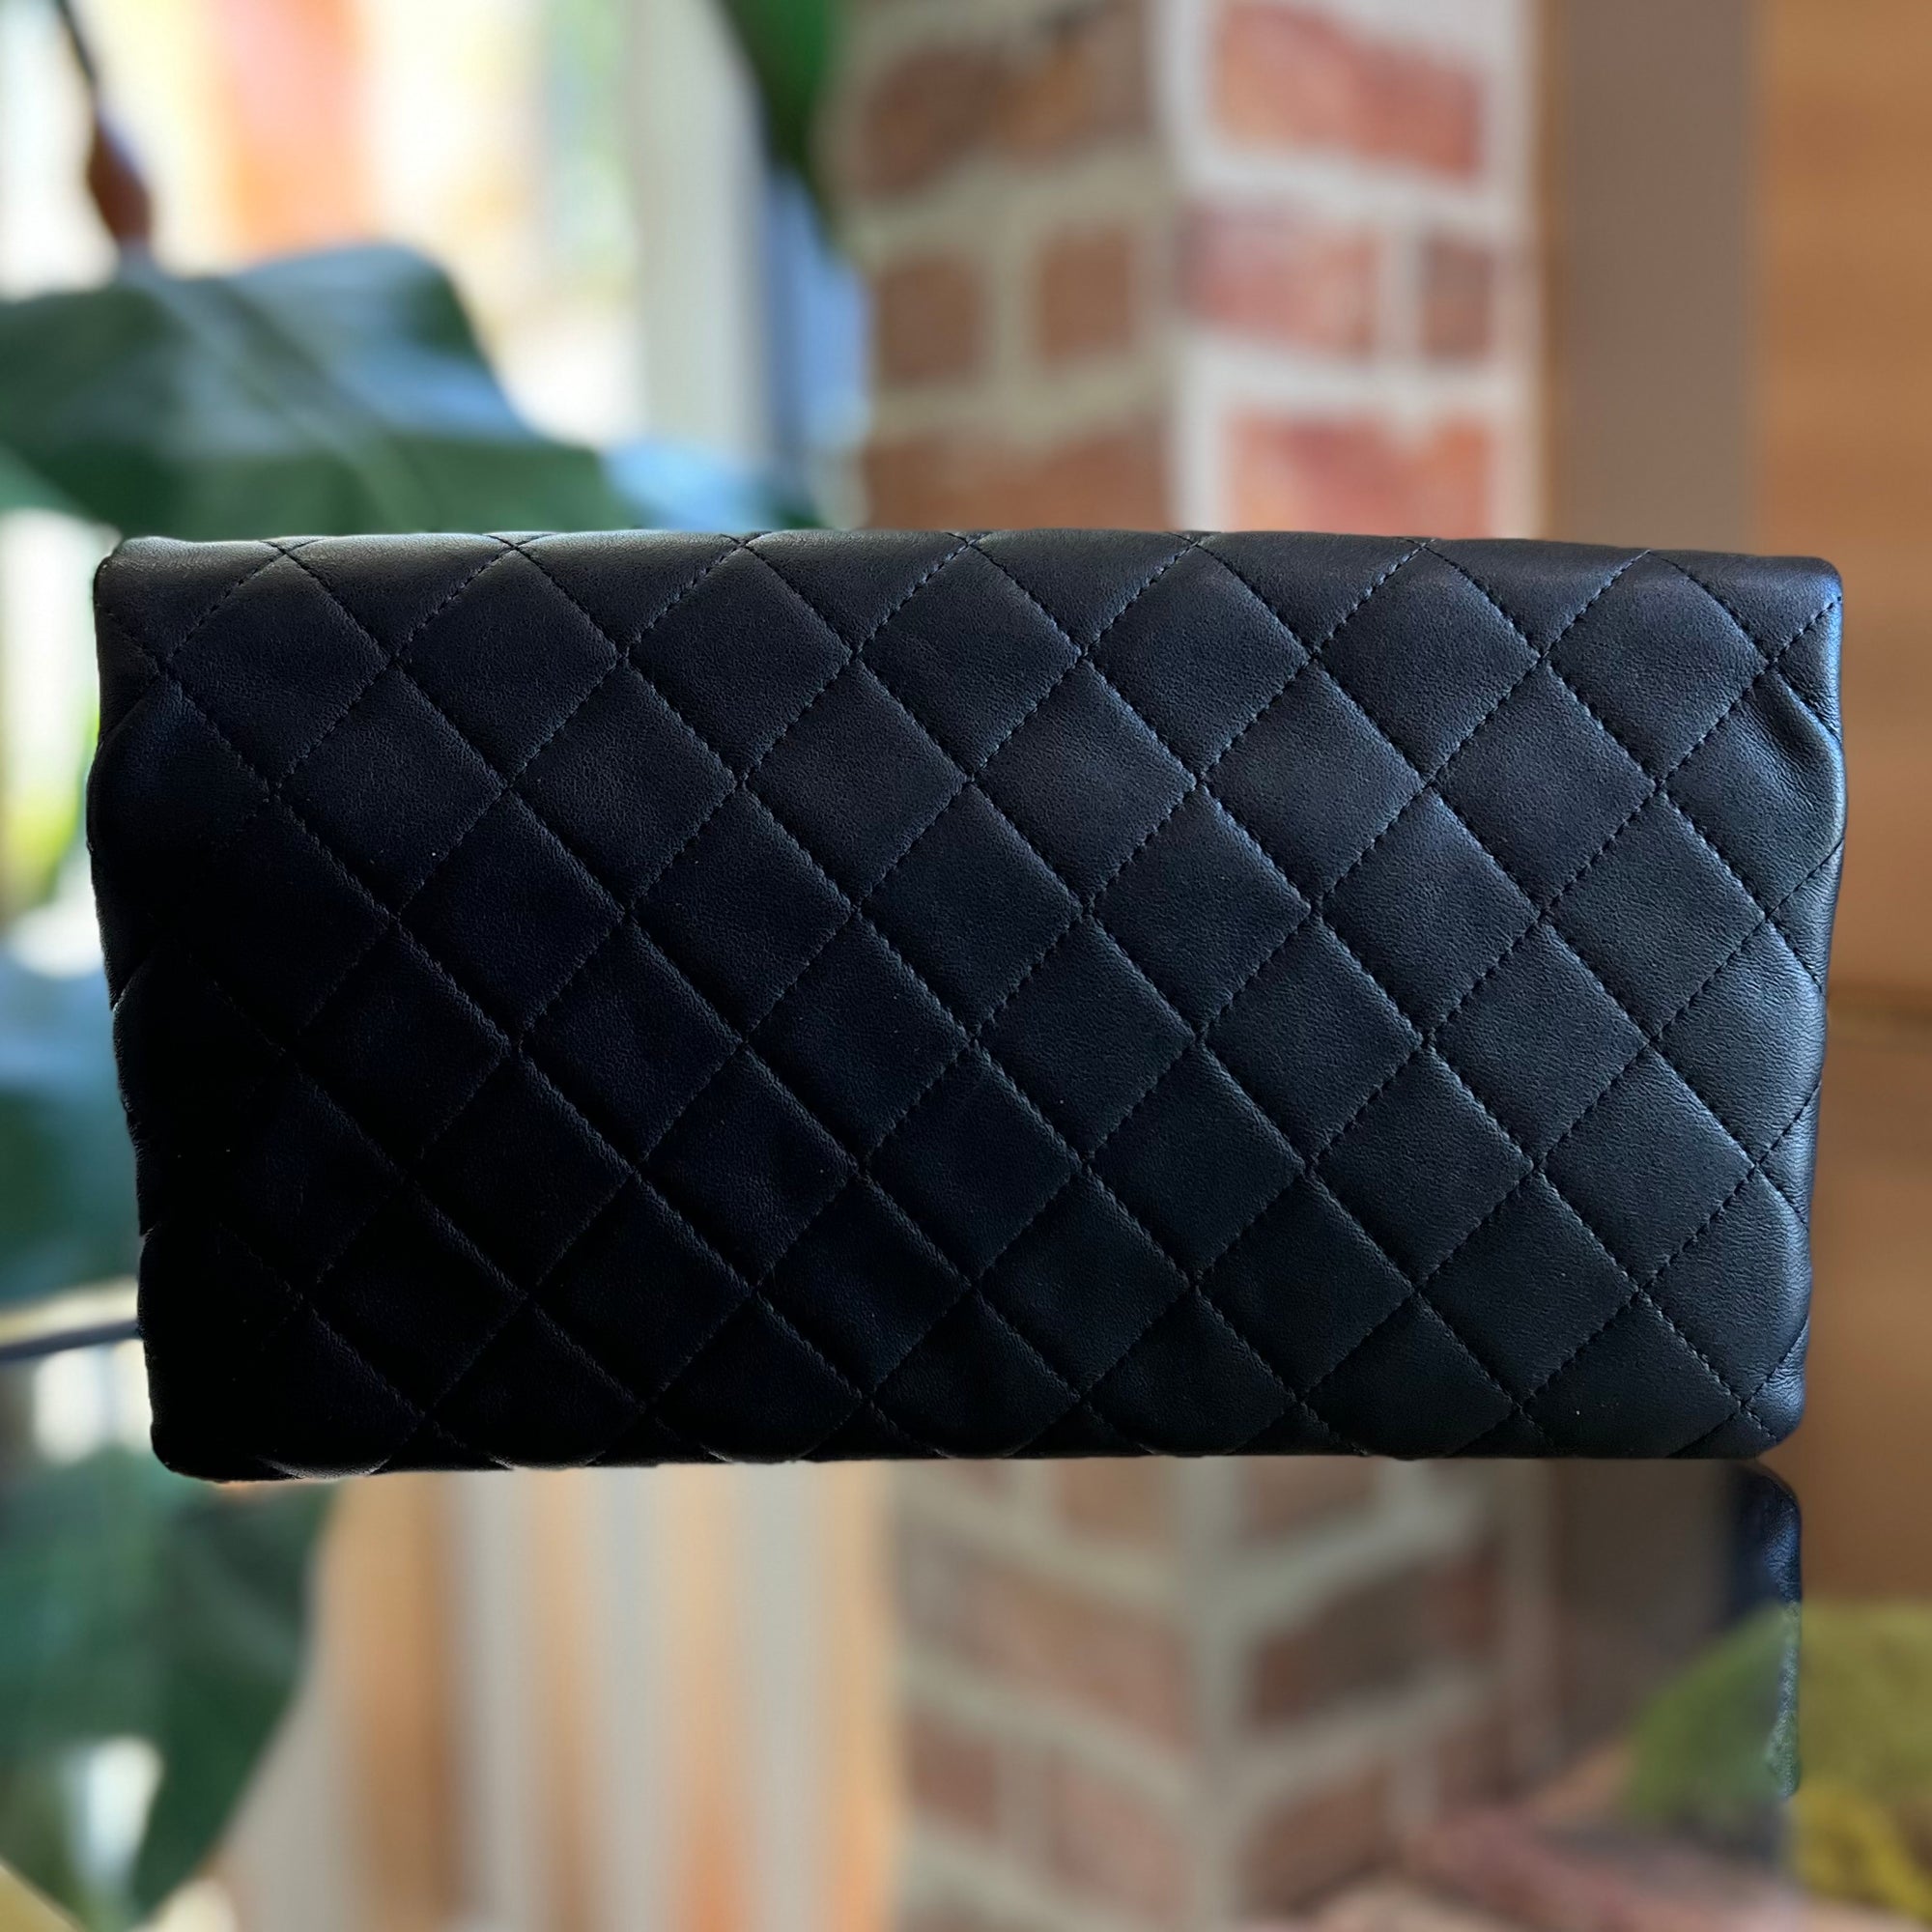 CHANEL Black Lambskin Quilted Leather Beauty Fold Over Clutch TS3177